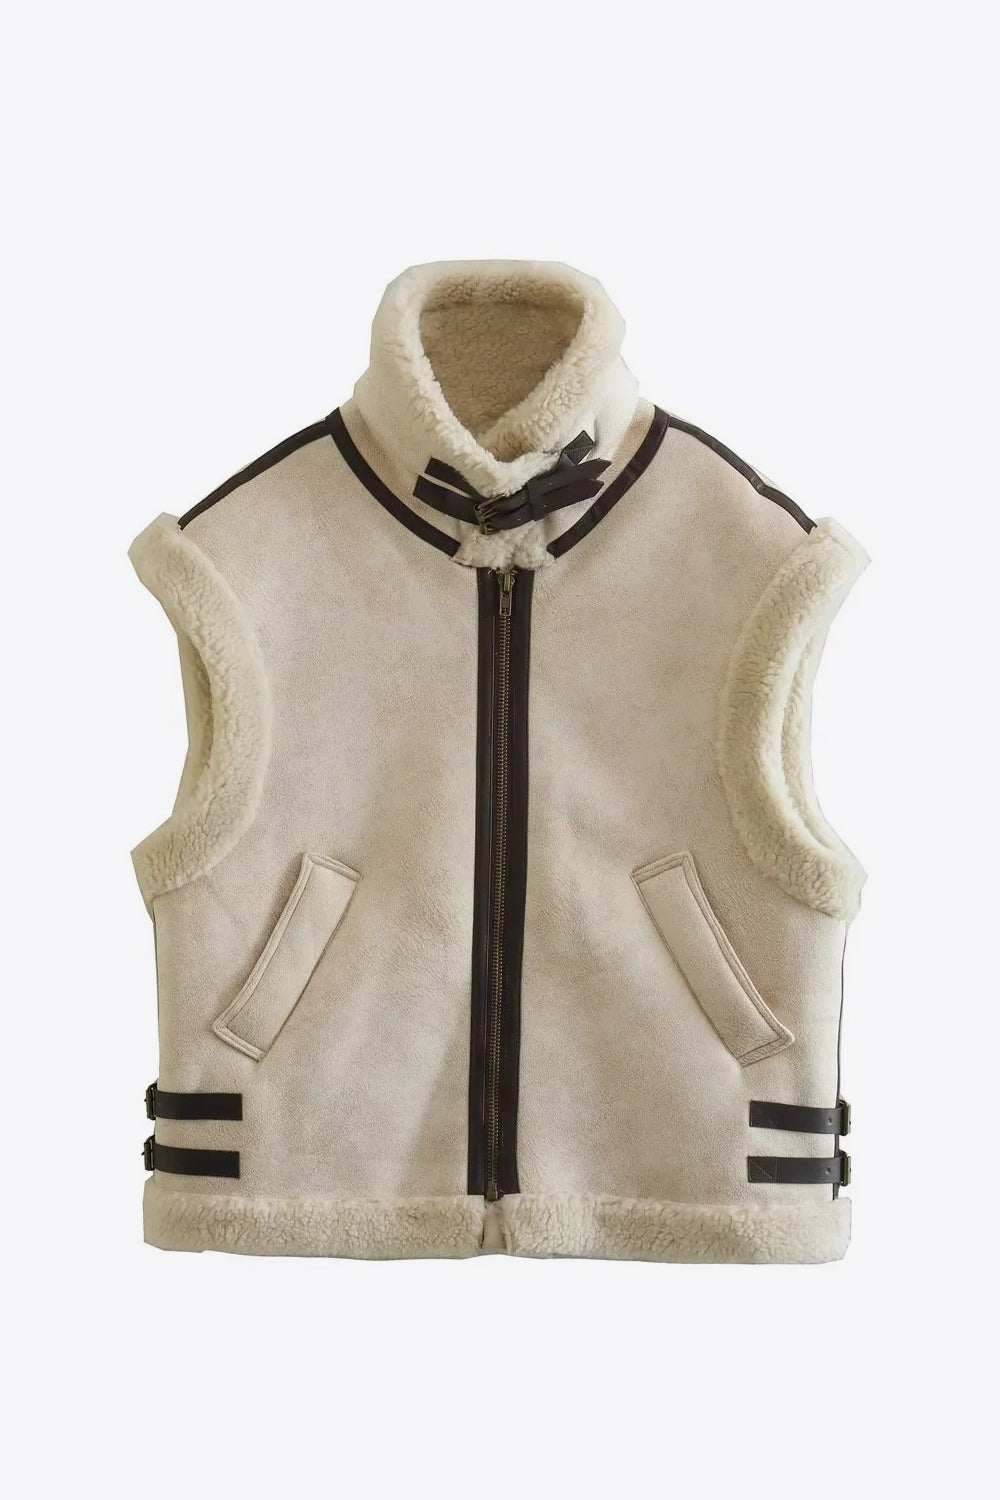 Collared Zip-Up Suede Sherpa Vest BLUE ZONE PLANET